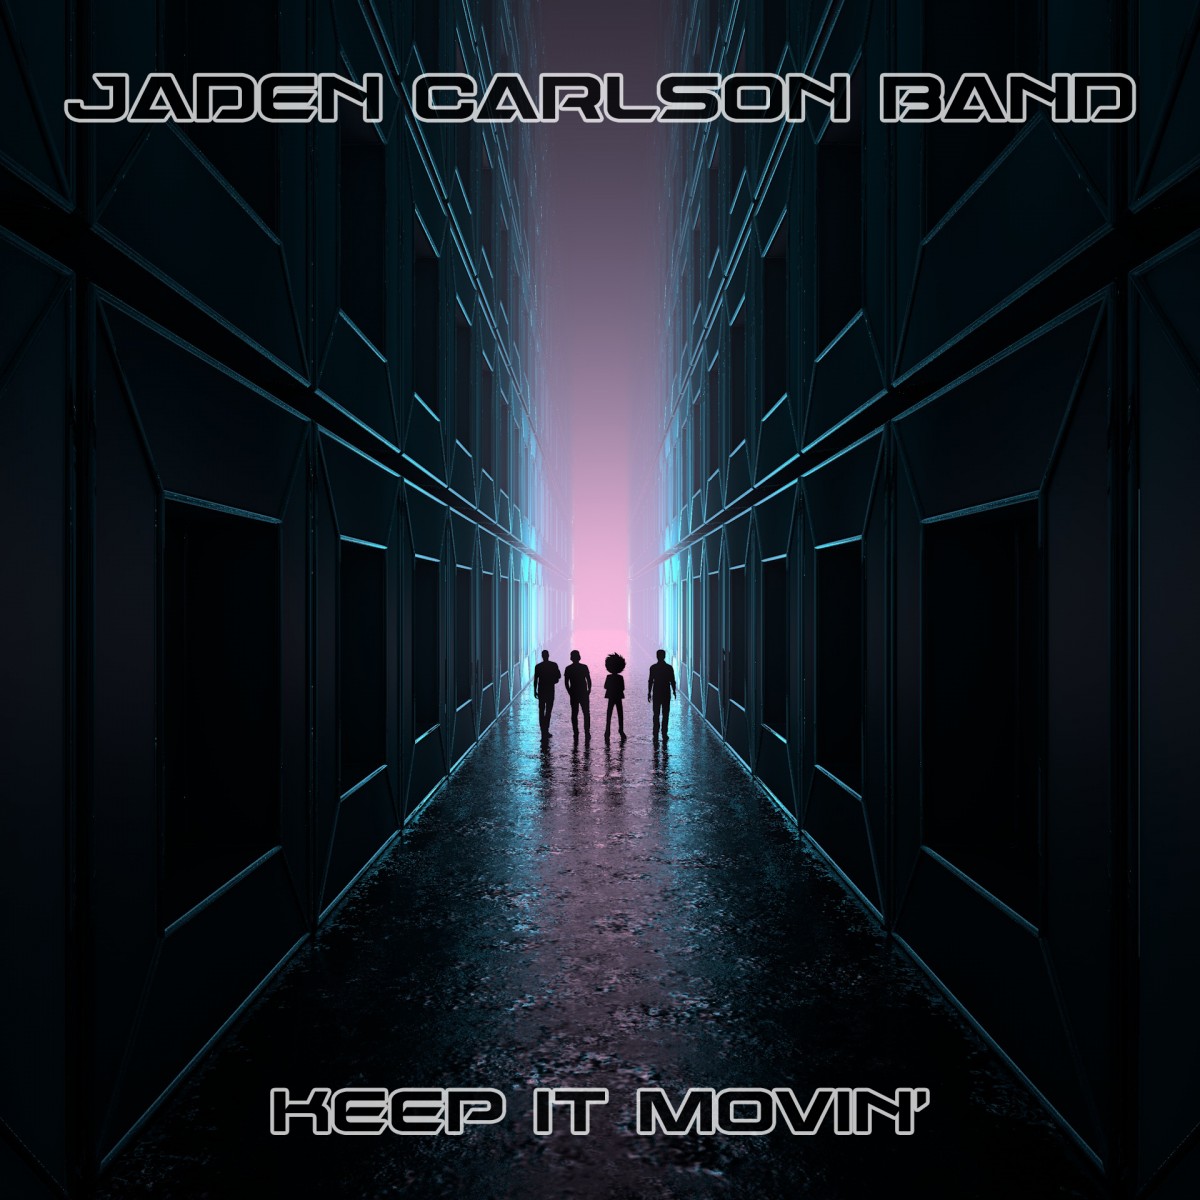 Album Review: Jaden Carlson Band, Keep it Movin